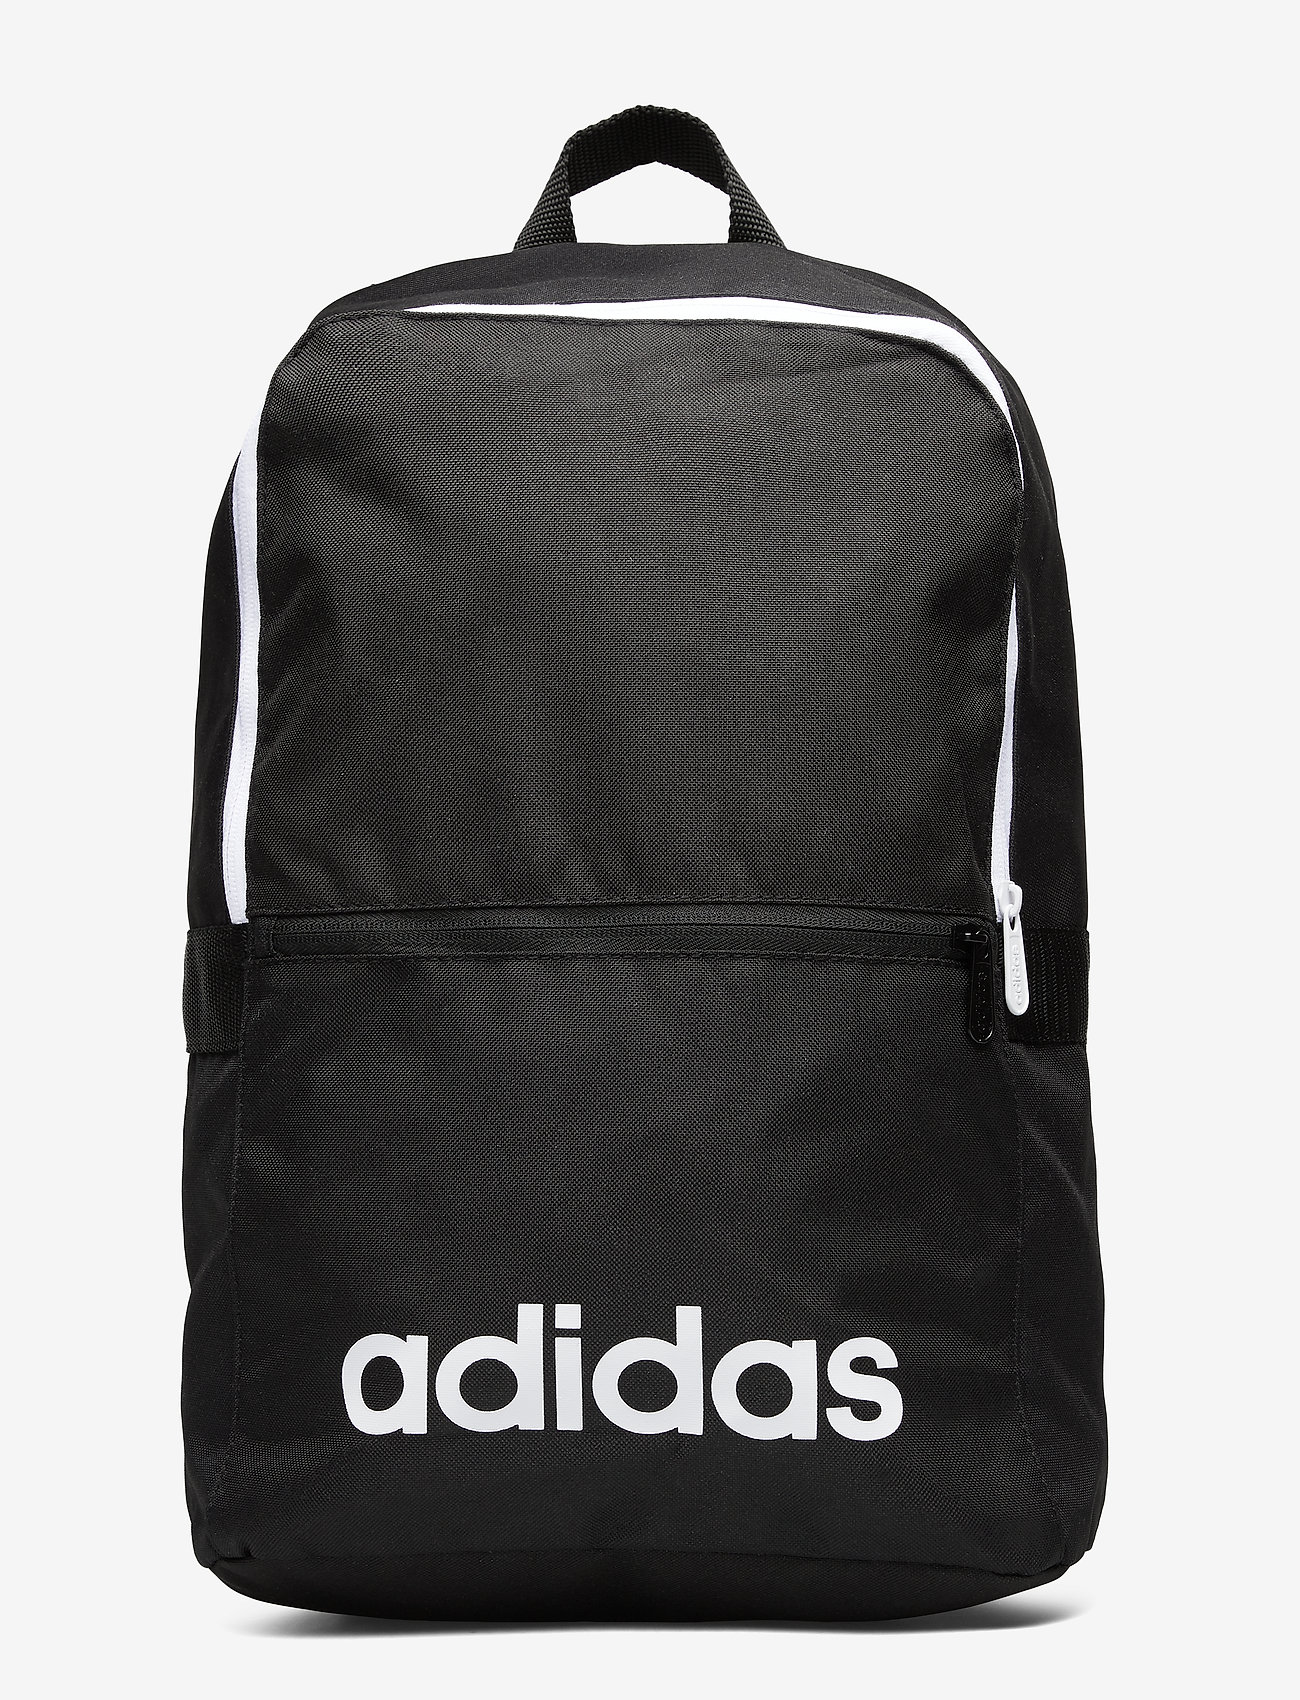 black and white adidas backpack